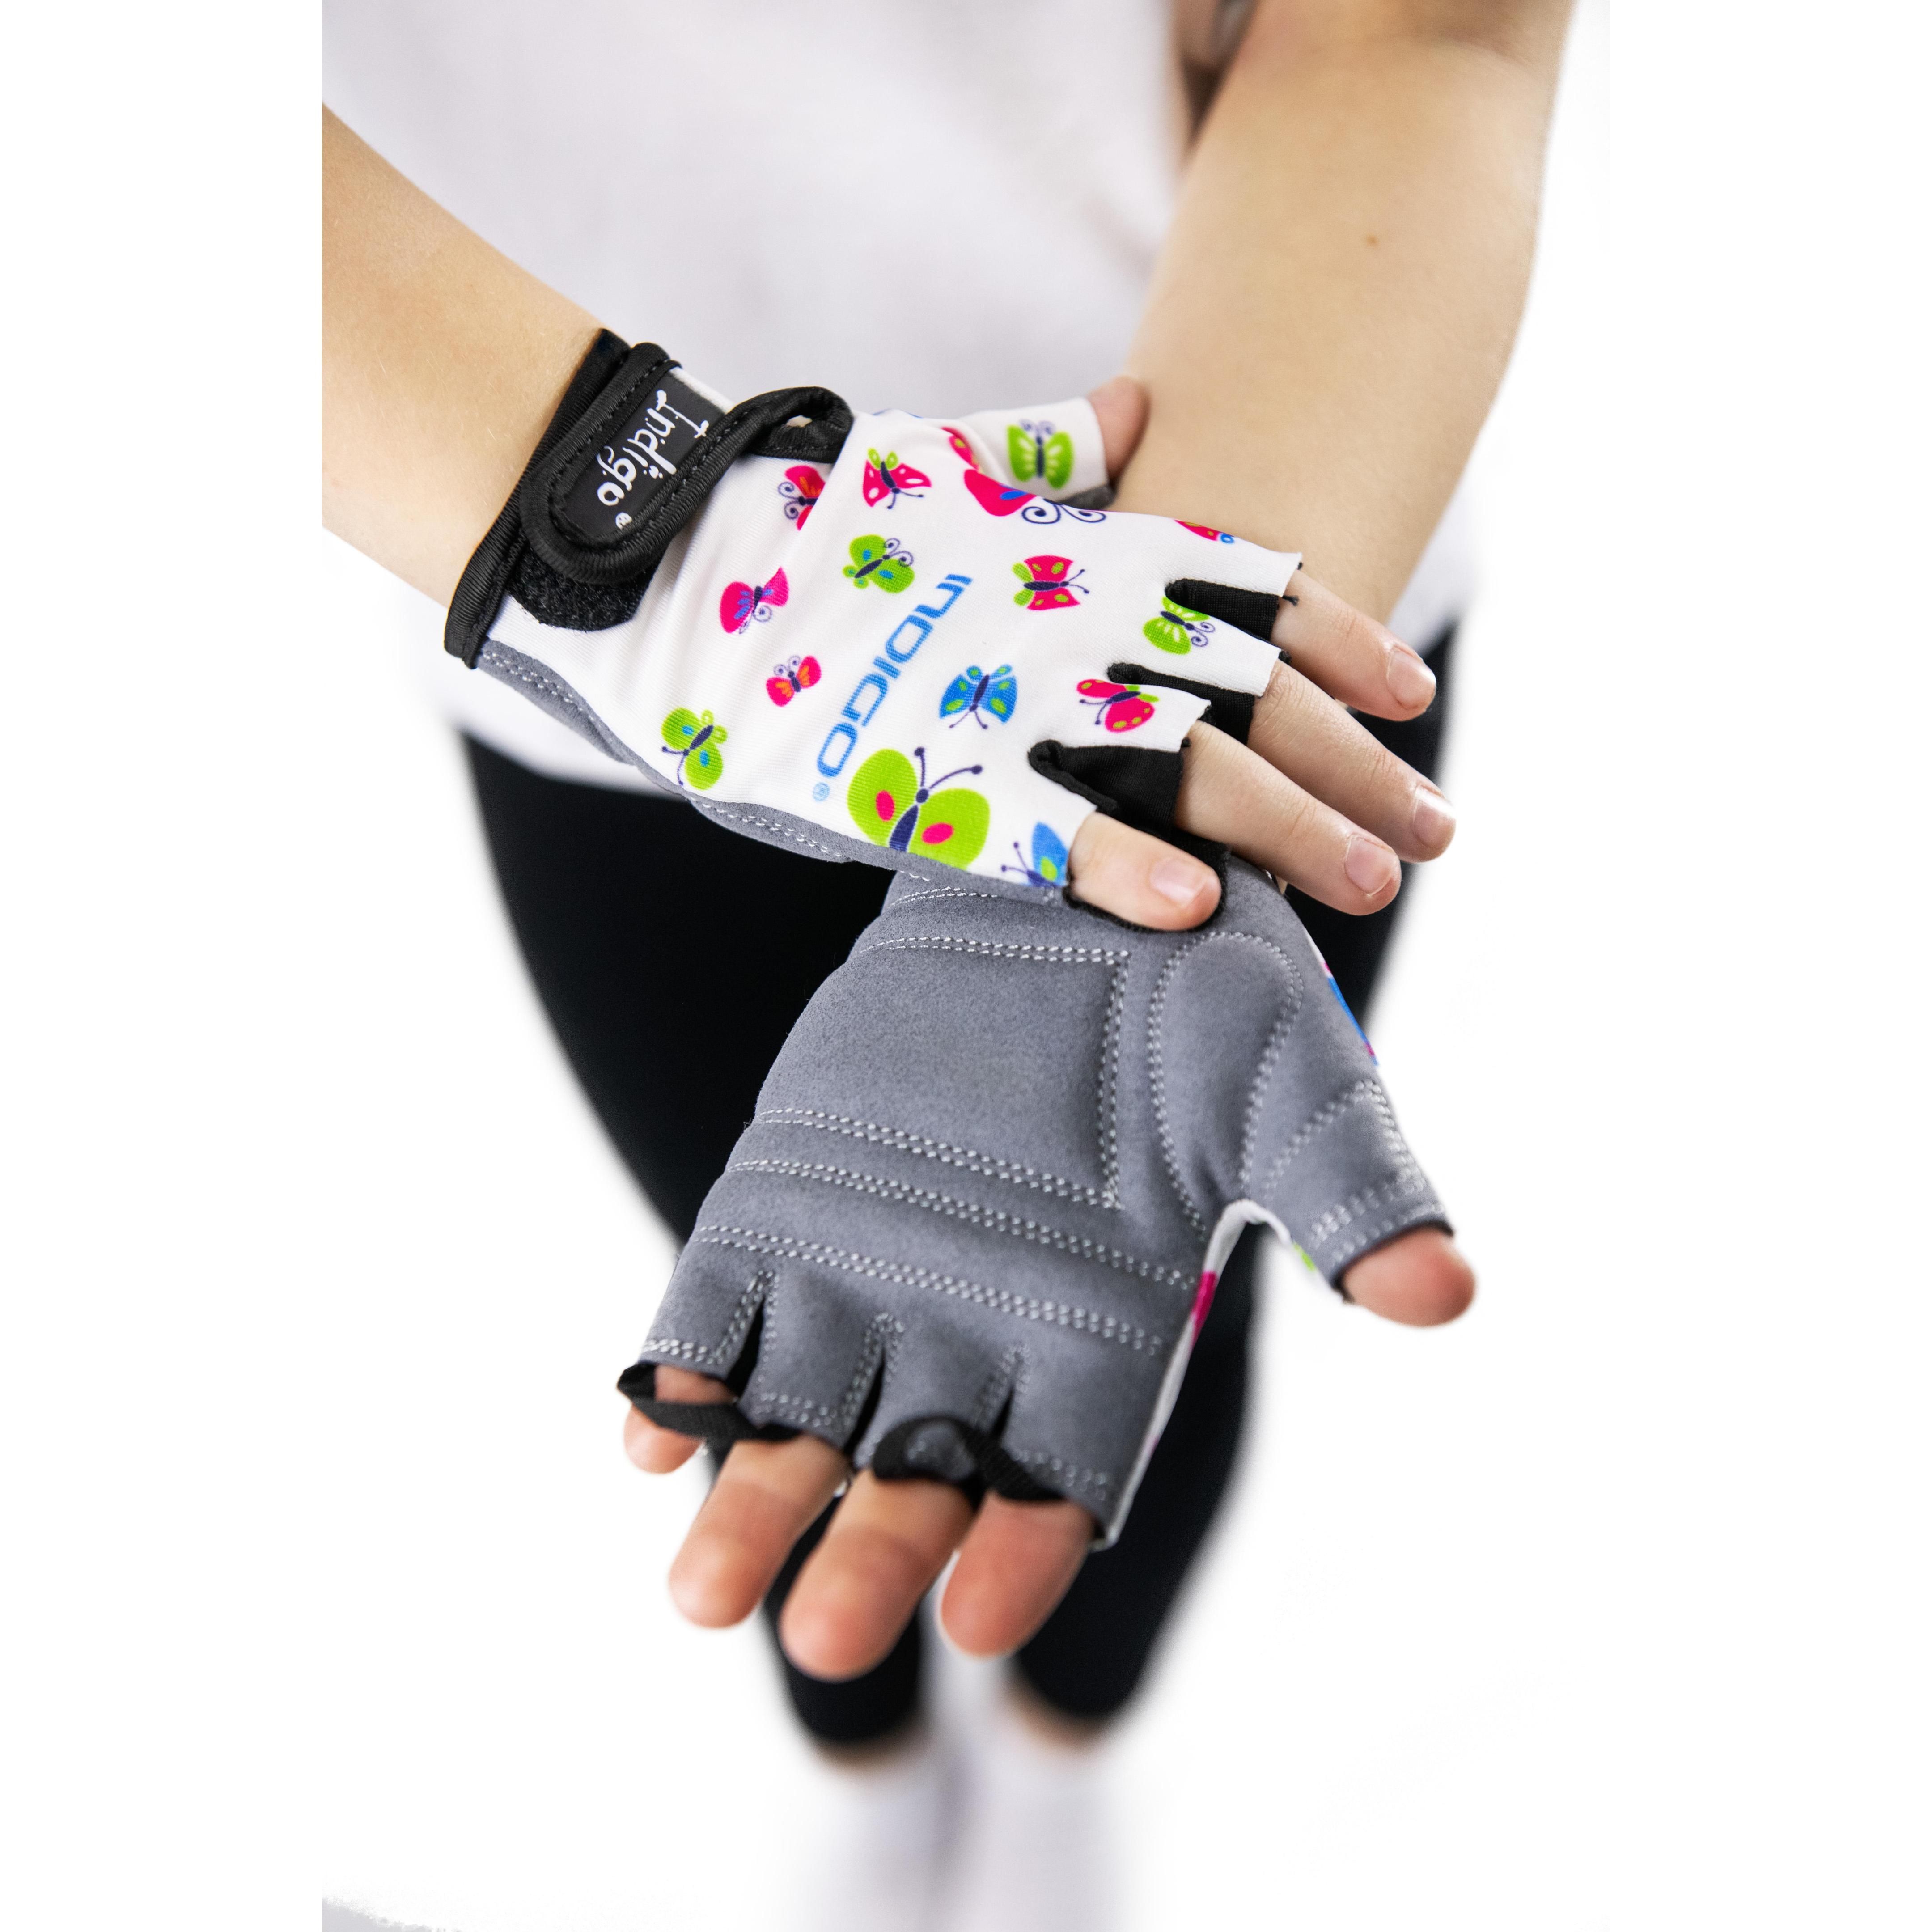 Guantes Ciclismo Infantil BUTTERFLY INDIGO Talle 3XS Blanco